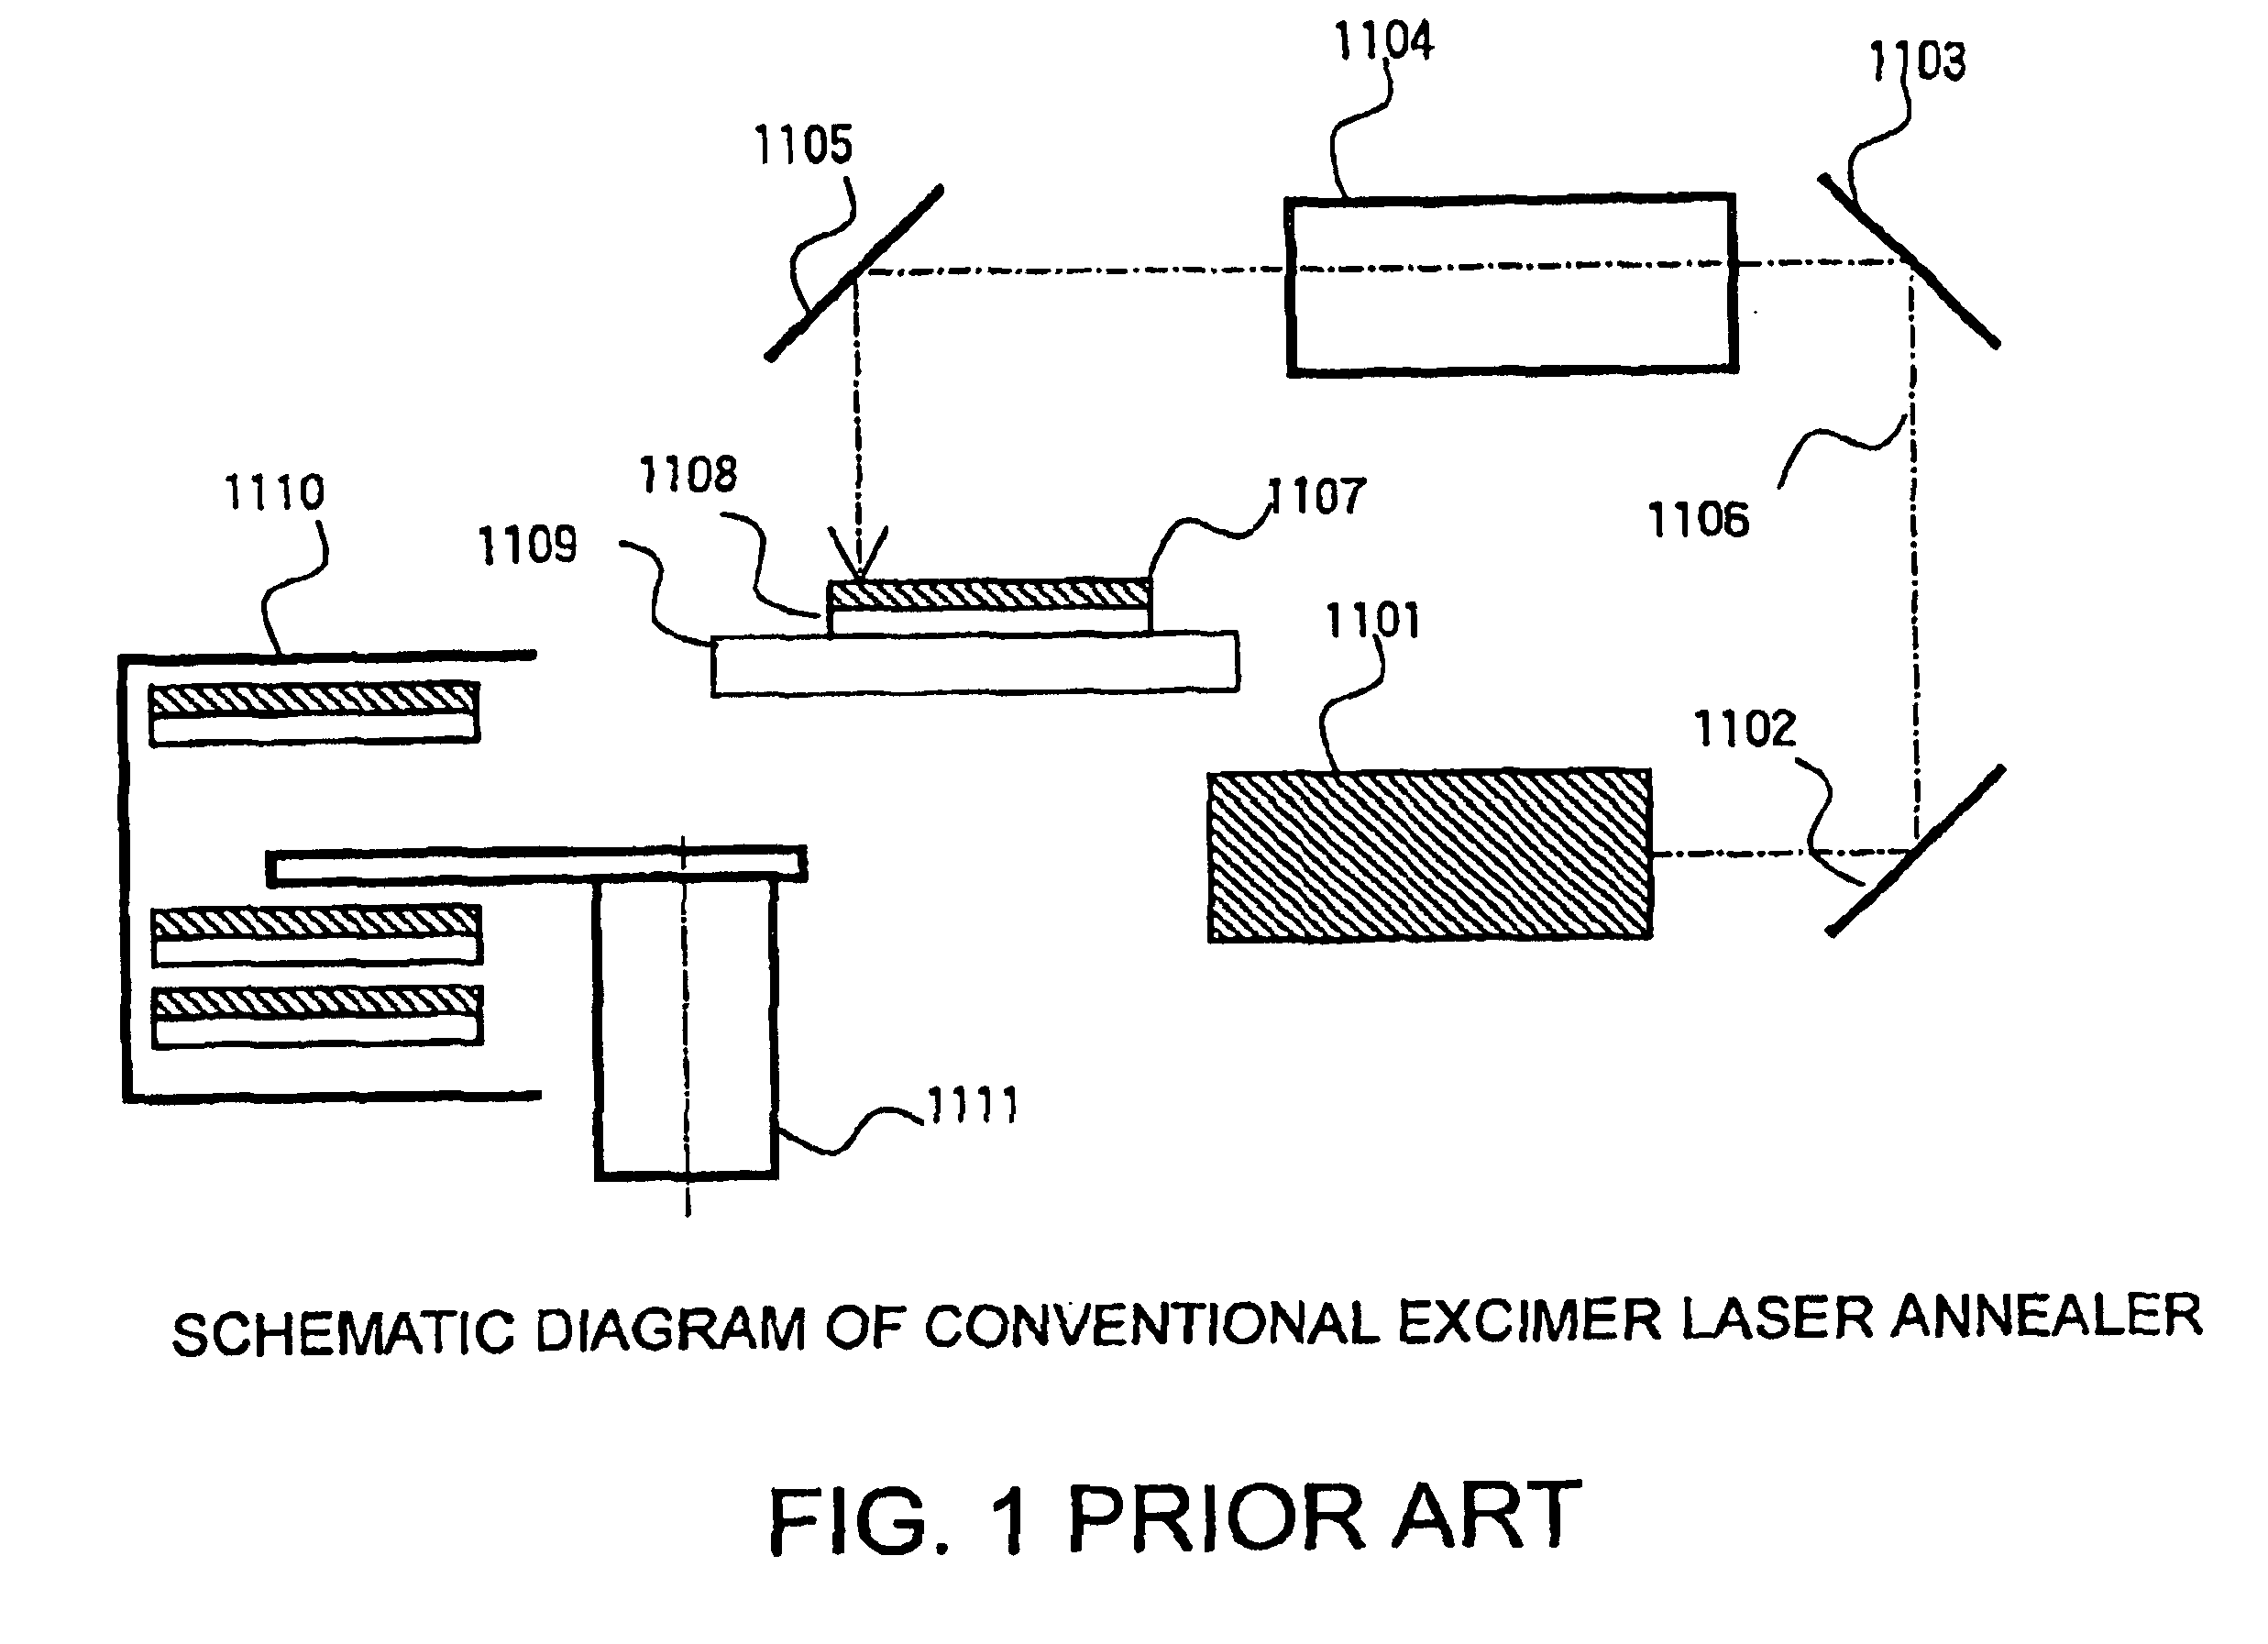 System for the formation of a silicon thin film and a semiconductor-insulating film interface